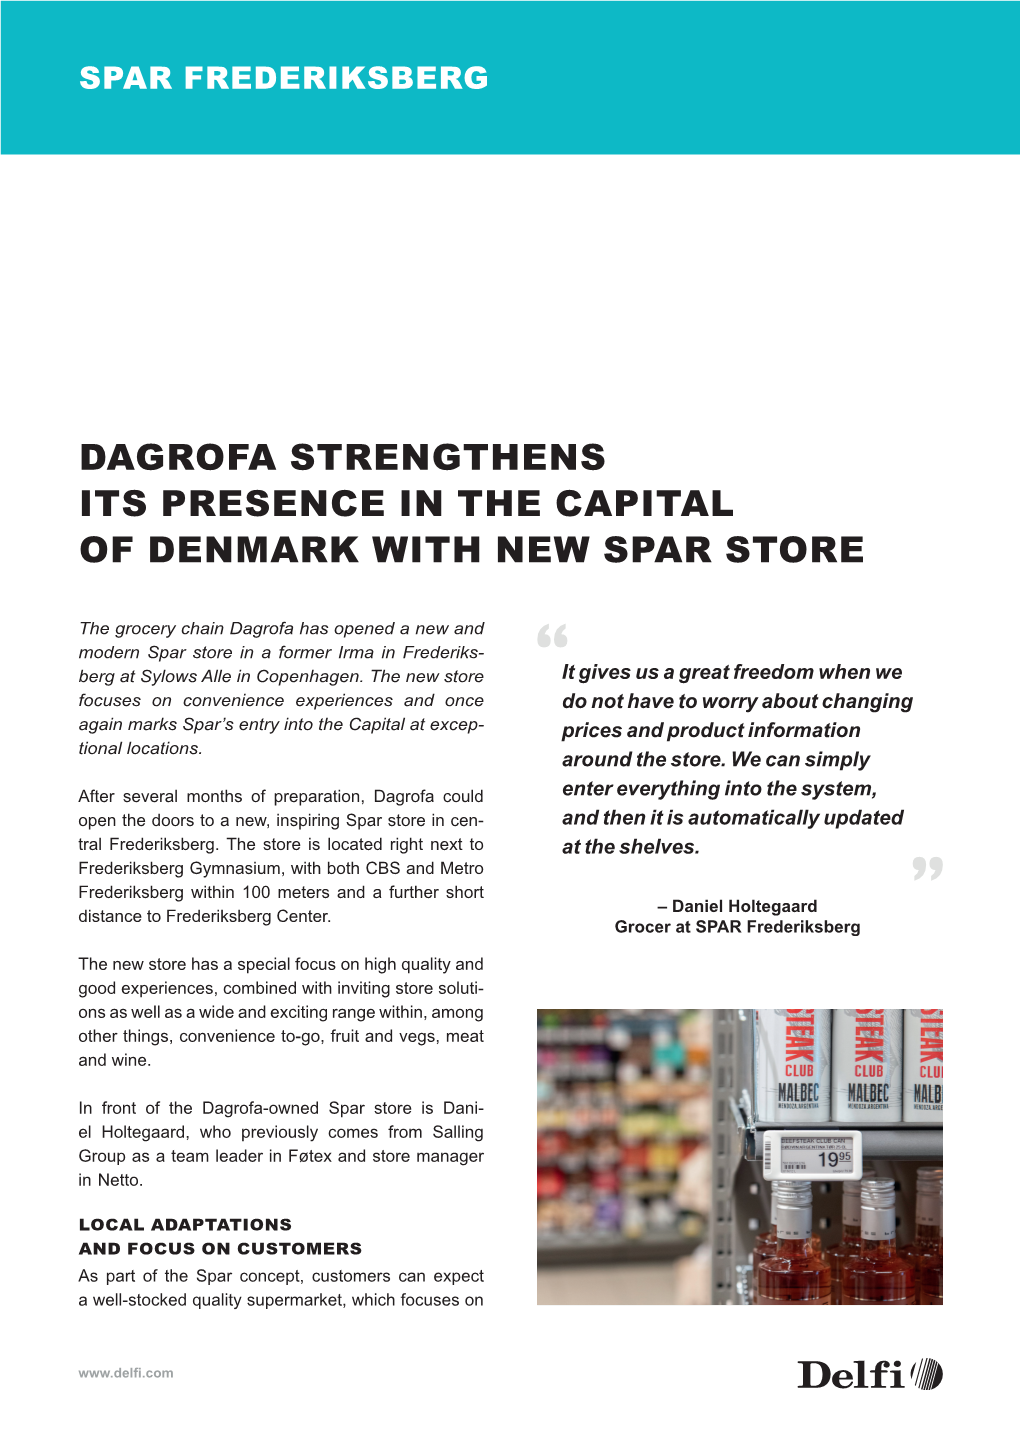 Dagrofa Strengthens Its Presence in the Capital of Denmark with New Spar Store